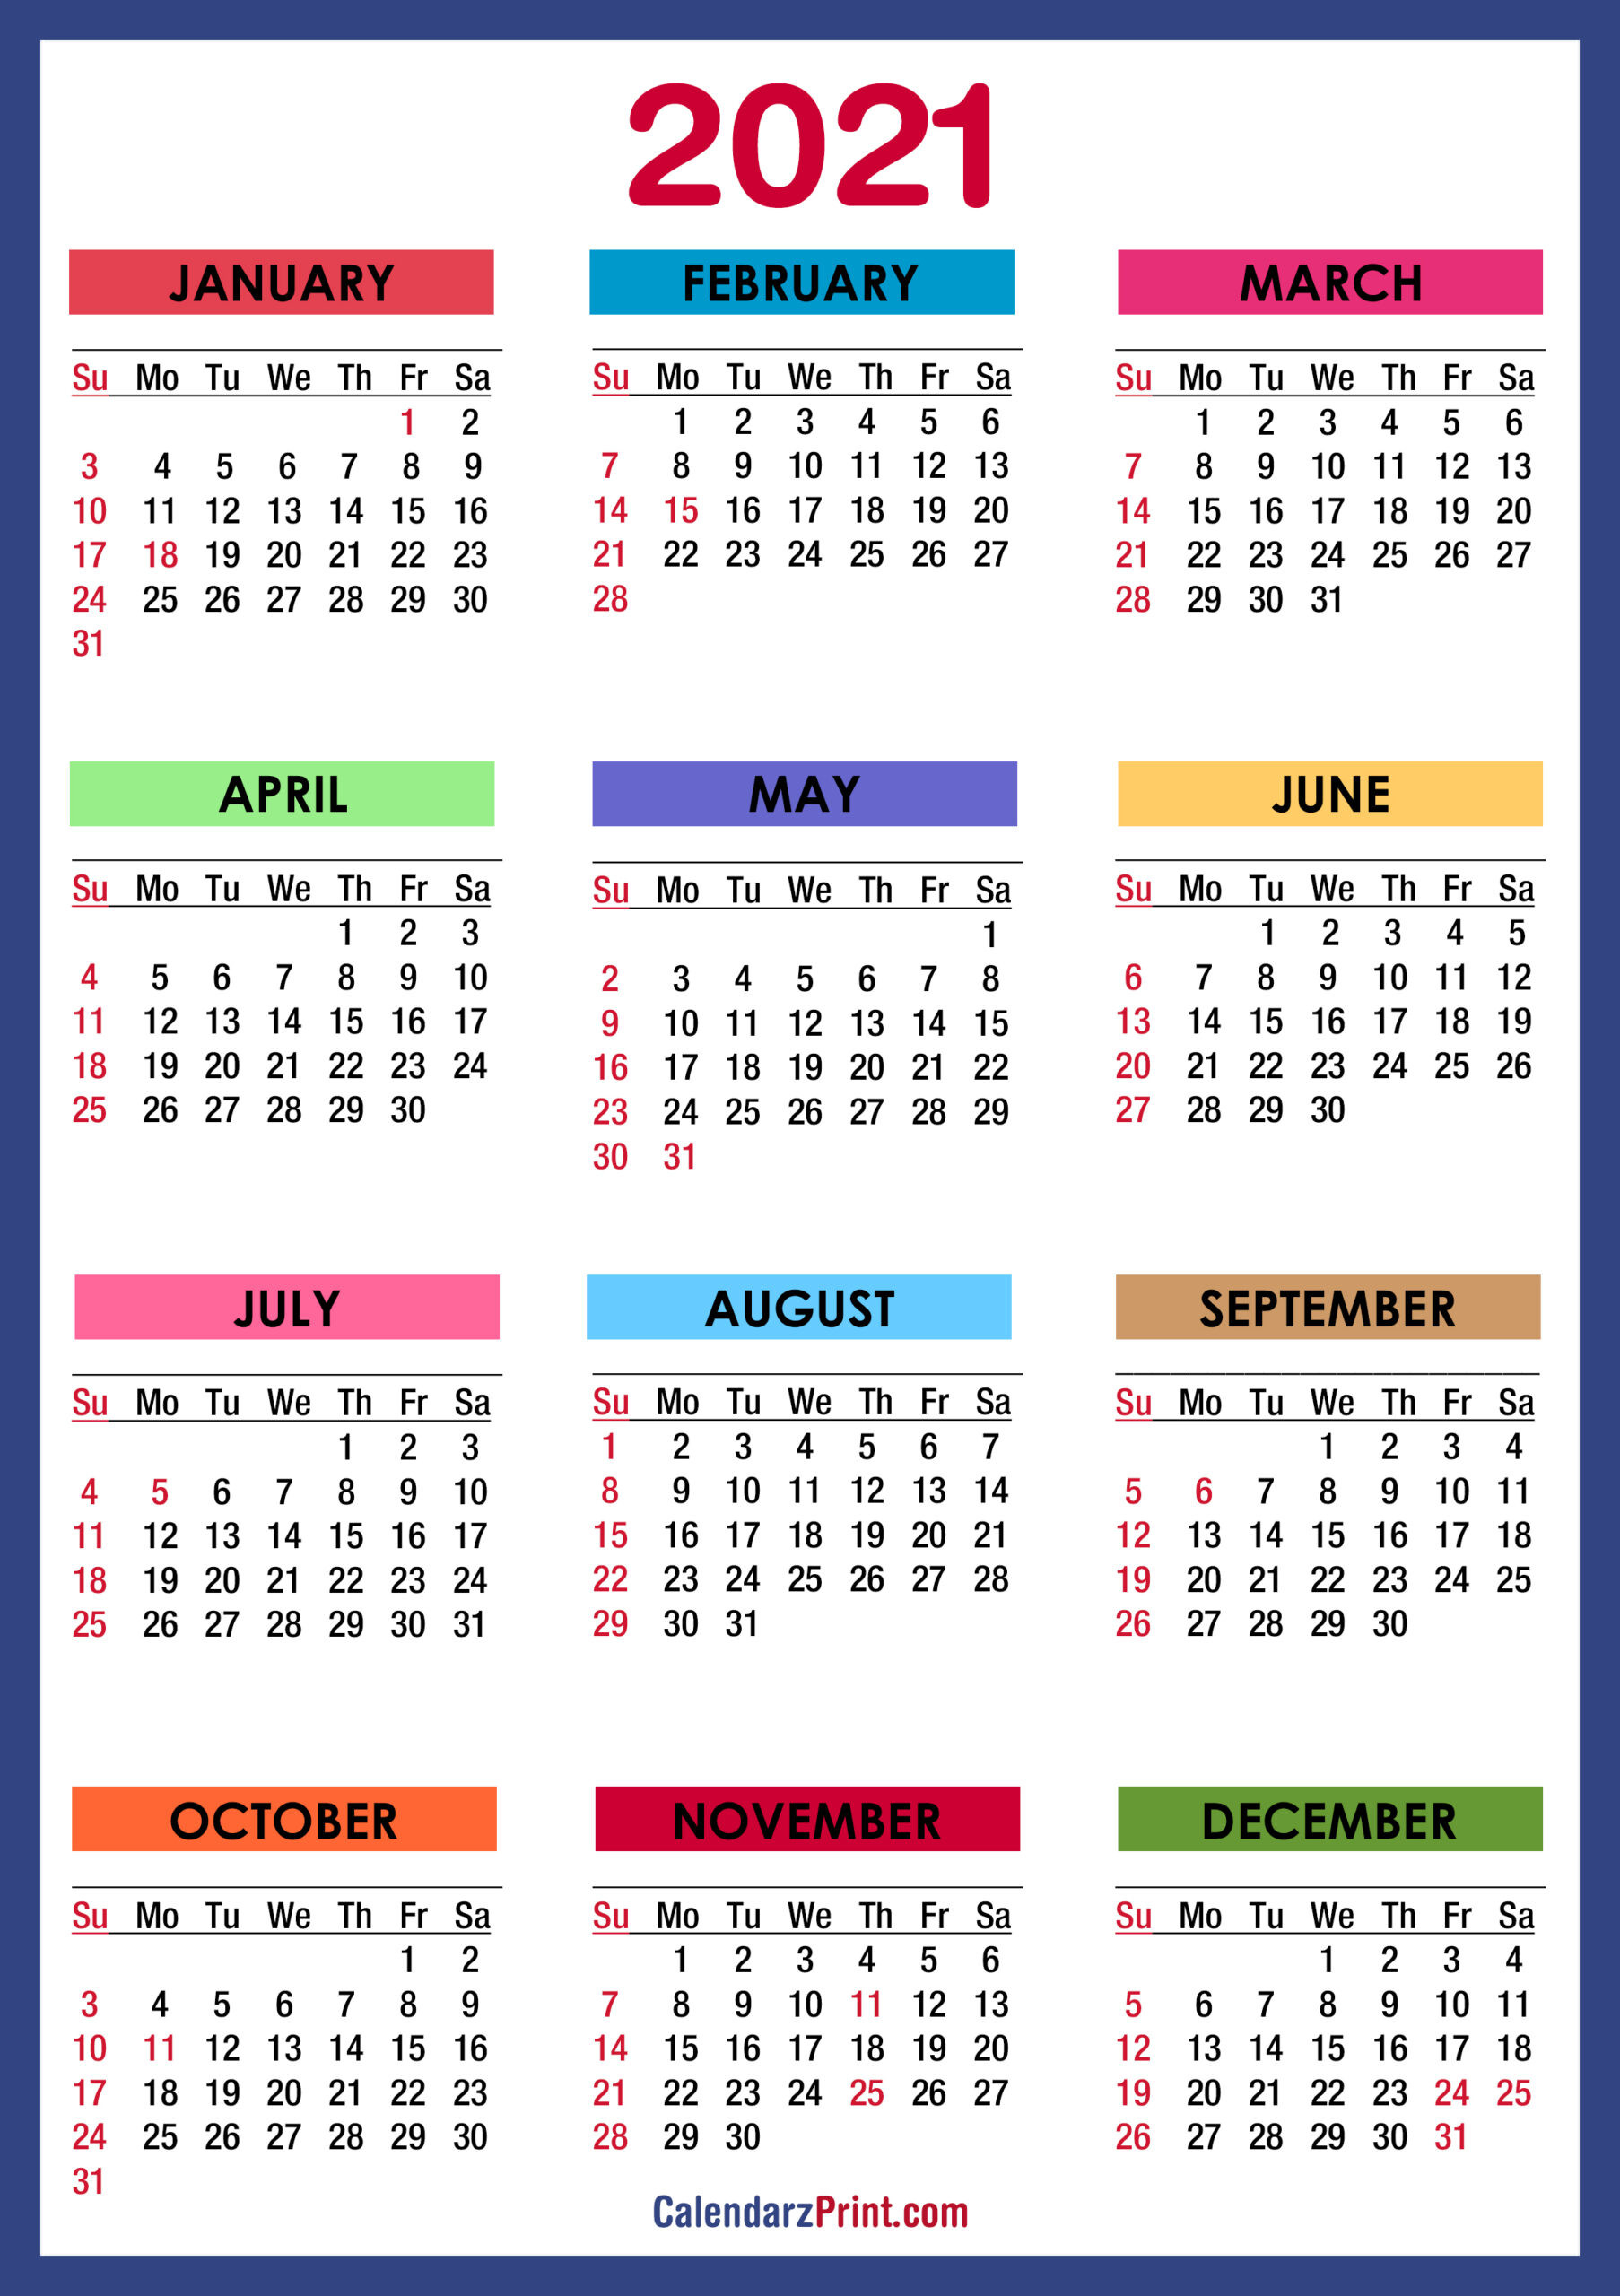 2021 Calendar Holidays Excel Download - 2021 Indian-Printable Vacation Calender For 2021